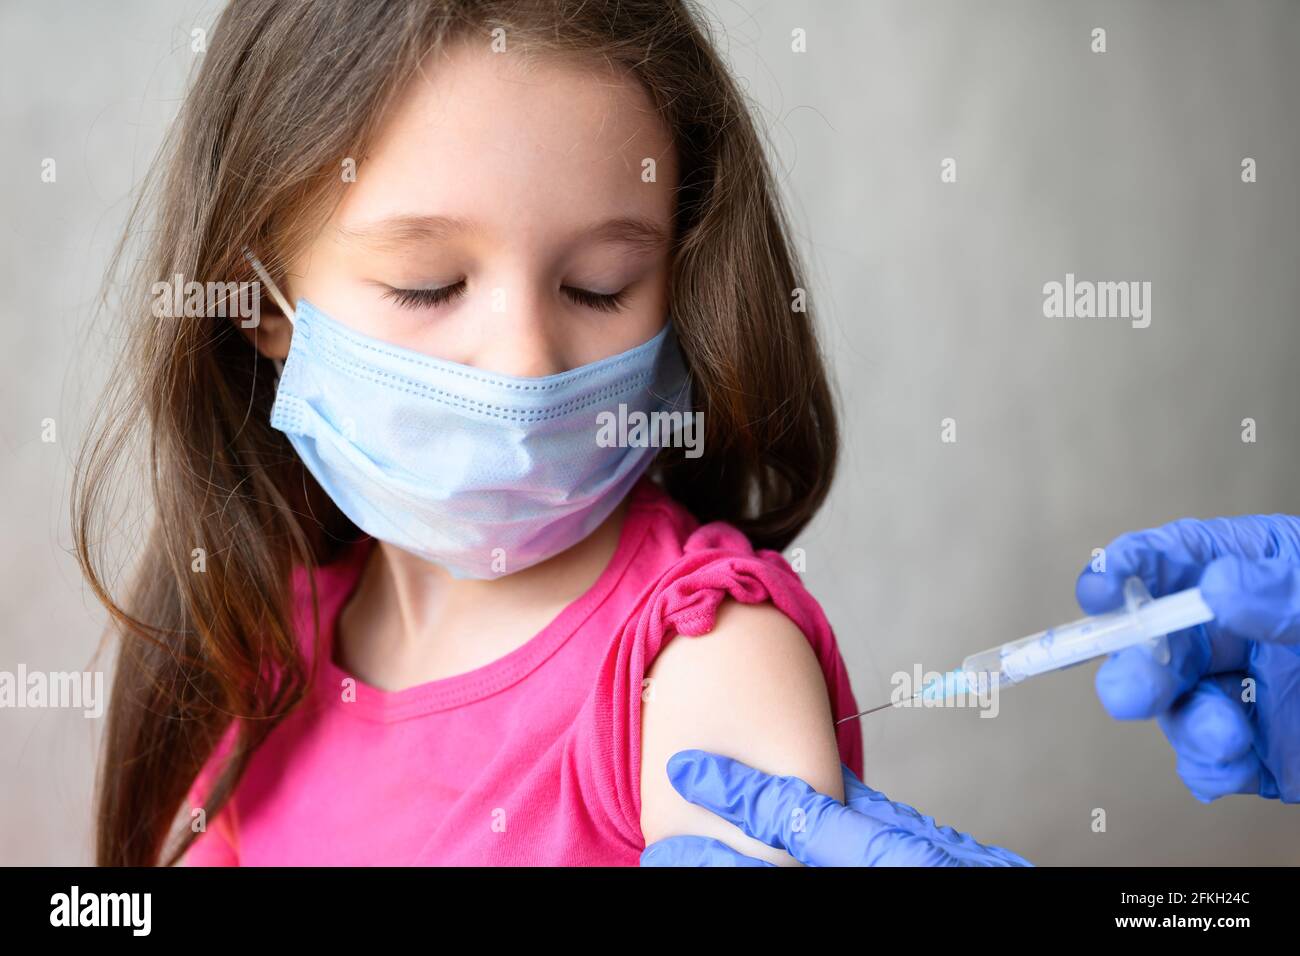 Vaccination of kid from COVID-19 or flu, cute little girl in mask closes eyes during injection. Doctor holds syringe for jab to child. Concept of coro Stock Photo